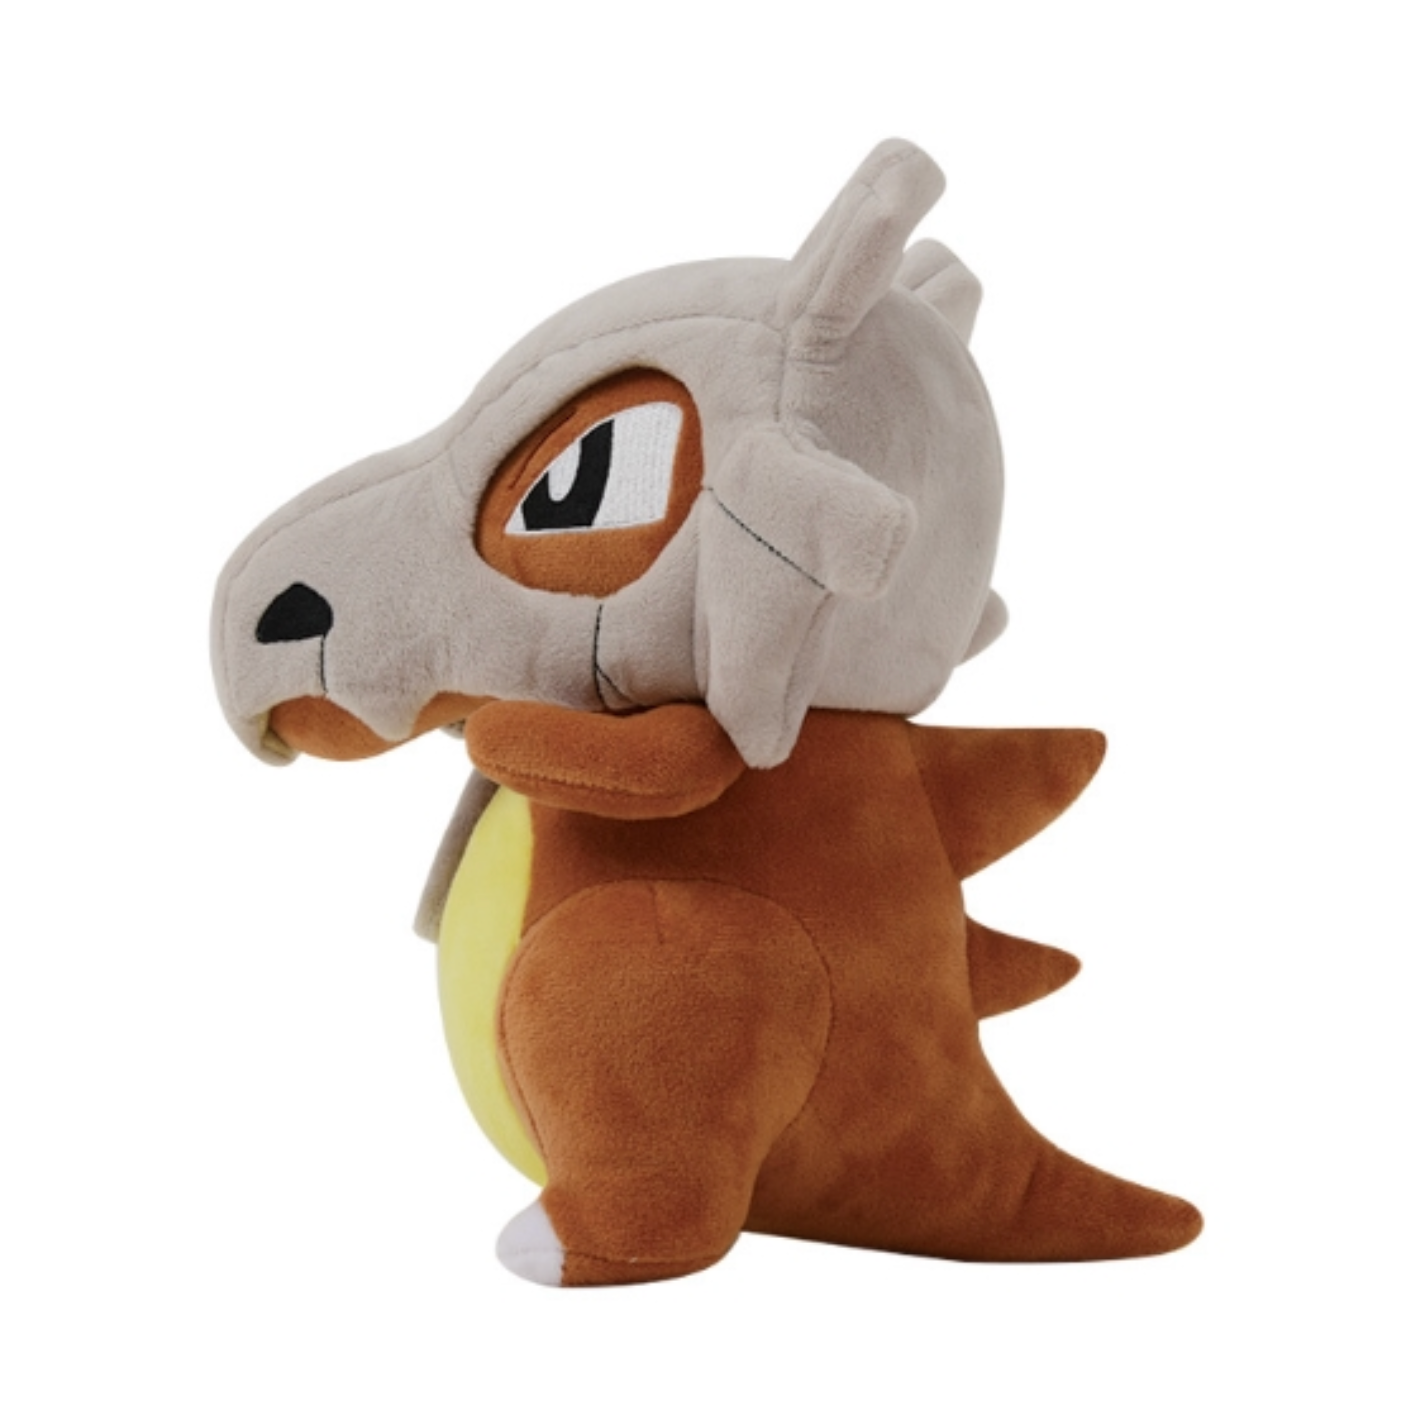 Pokemon Cubone with Mask 9" Inch Plush Toys Stuffed Dolls Cute Figures for Children Gift